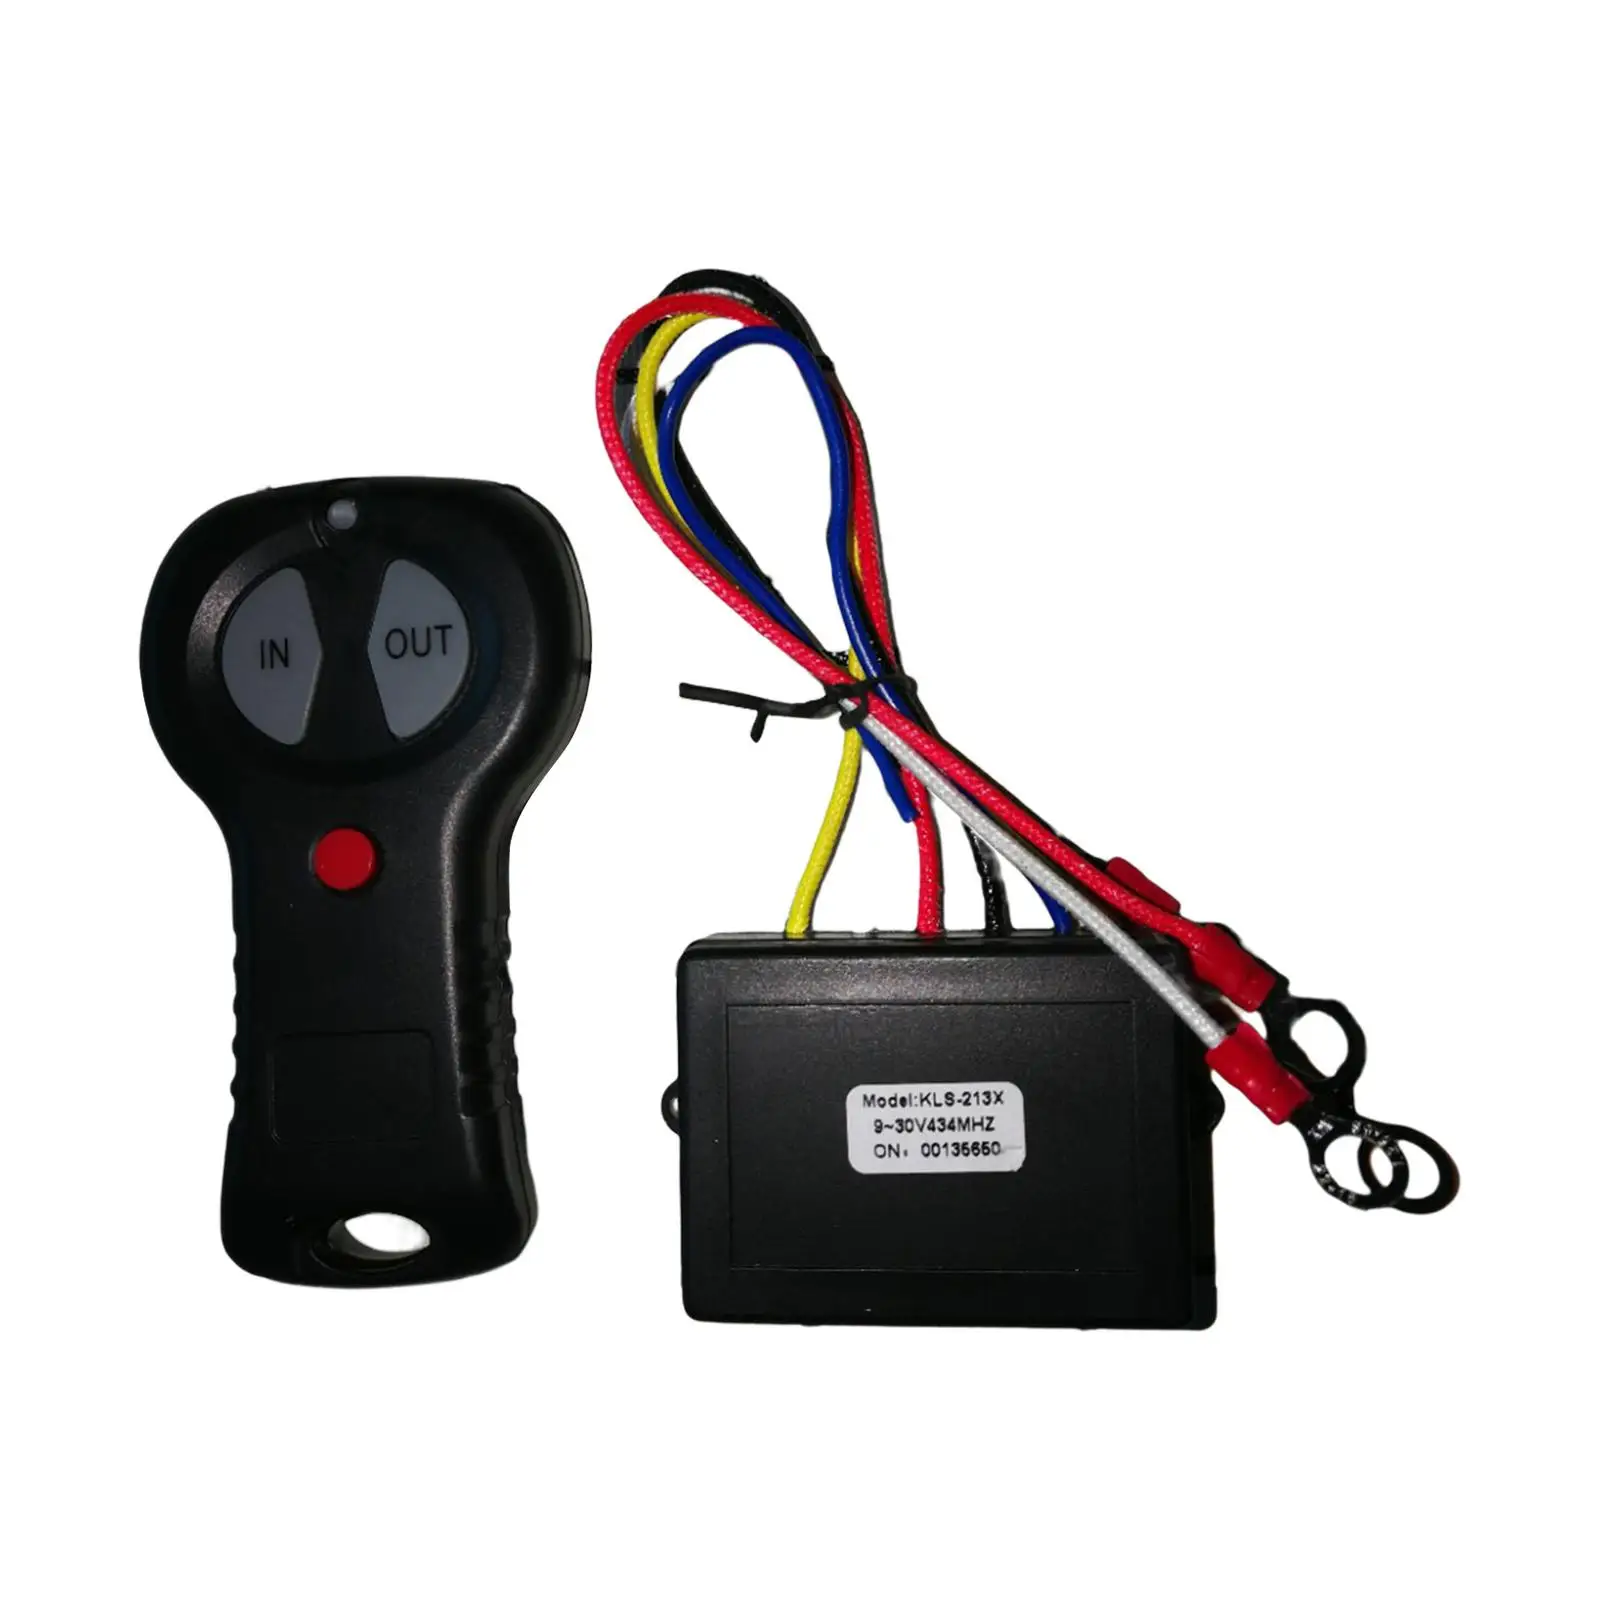 Wireless Winch Remote Control Winch Switches Handset switches easy to Install 12V Accessory for Car SUV Dump Trailer ATV